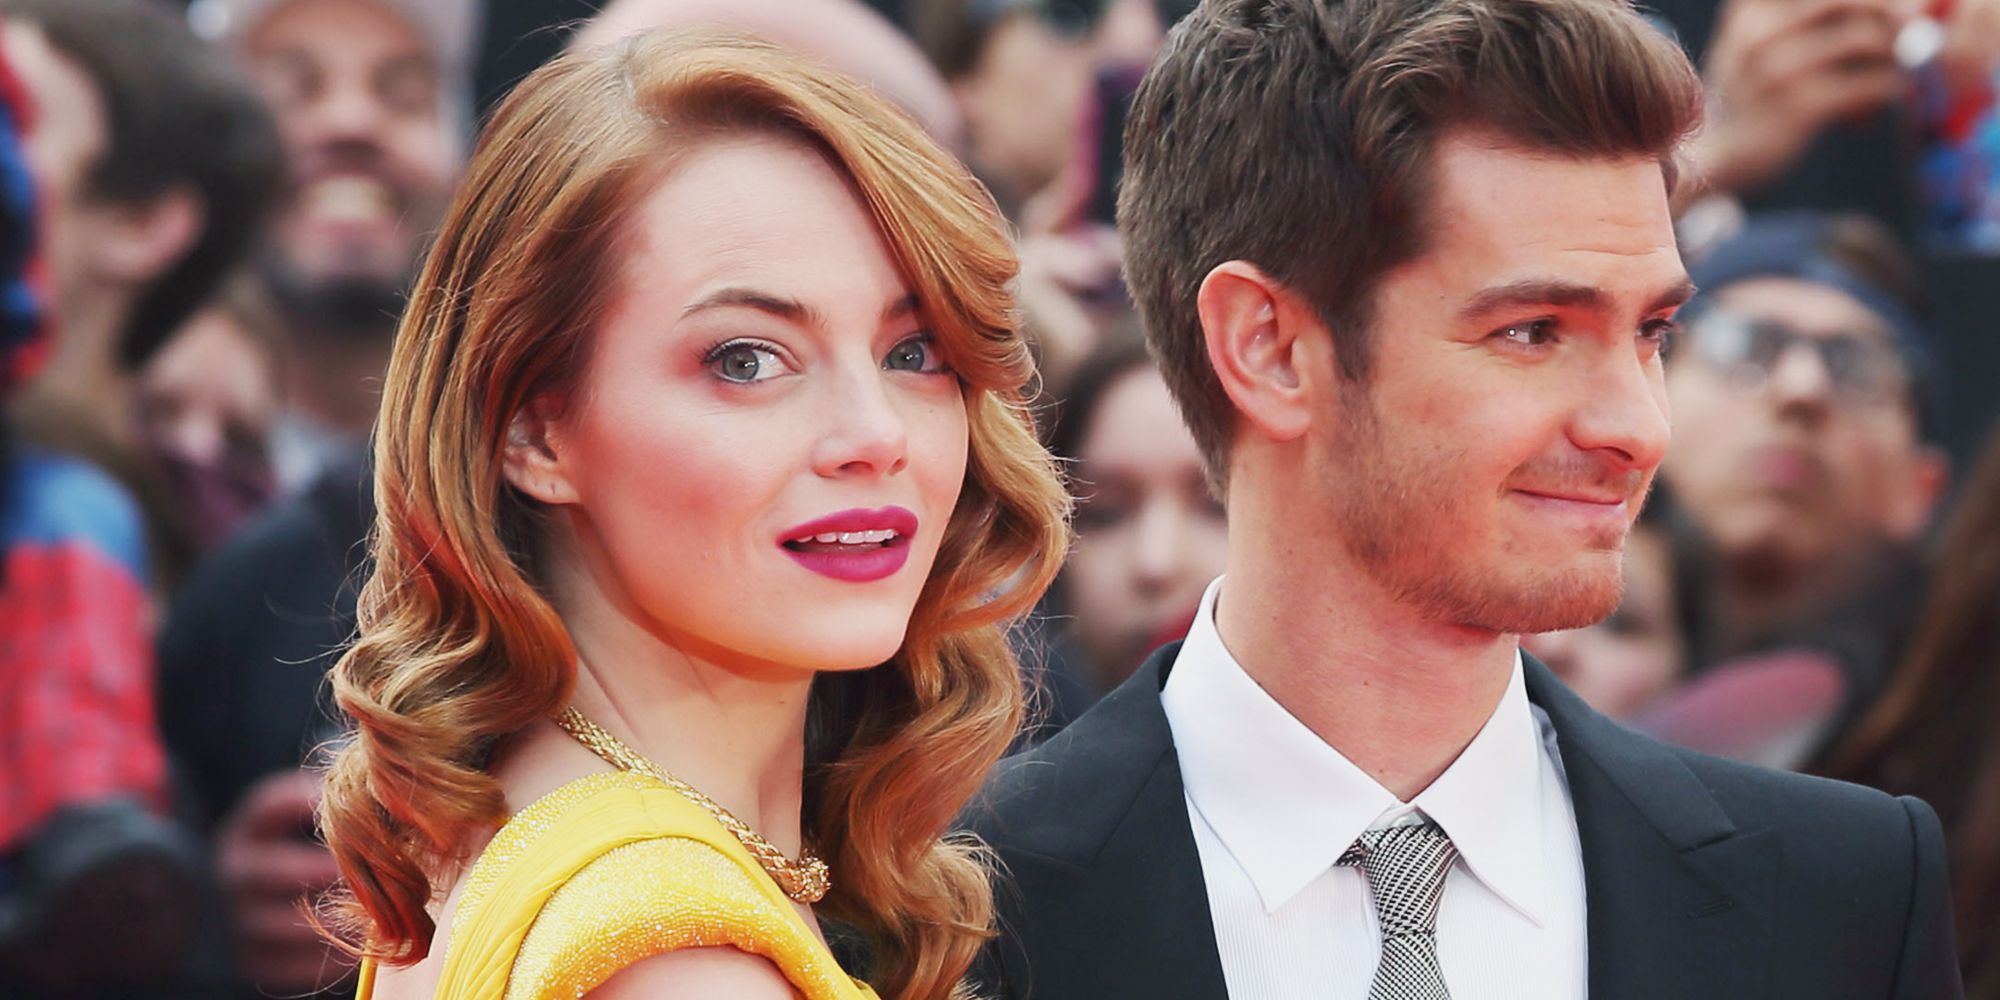 Emma Stone and Andrew Garfield arriving at the Costume Institute